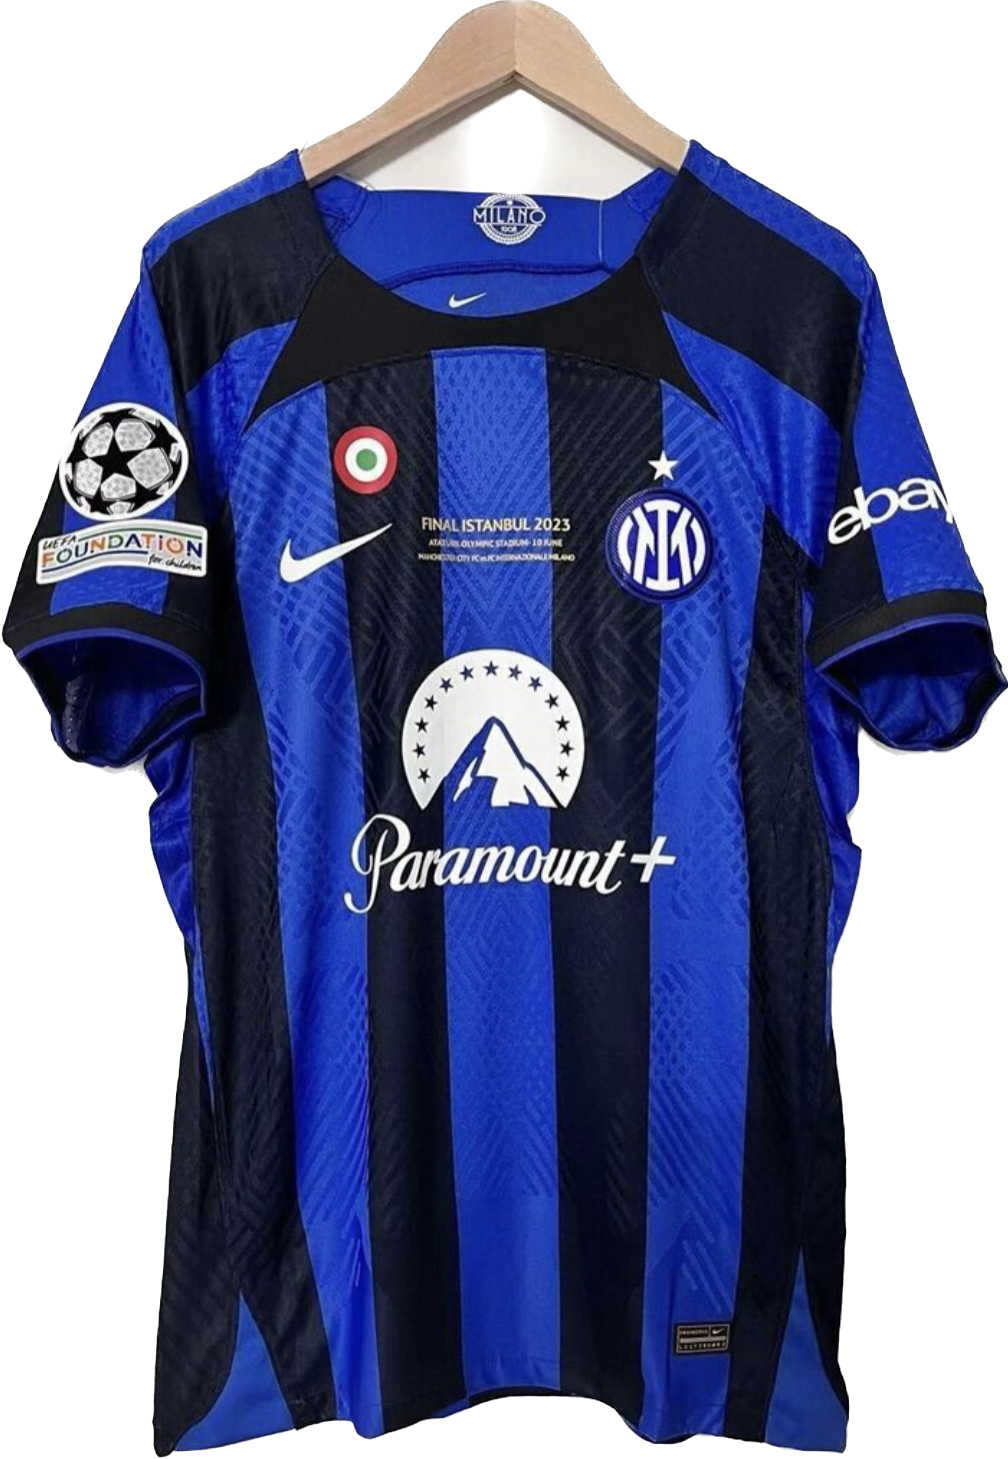 Inter Full Patch - Speciale Finale Instanbul 2023